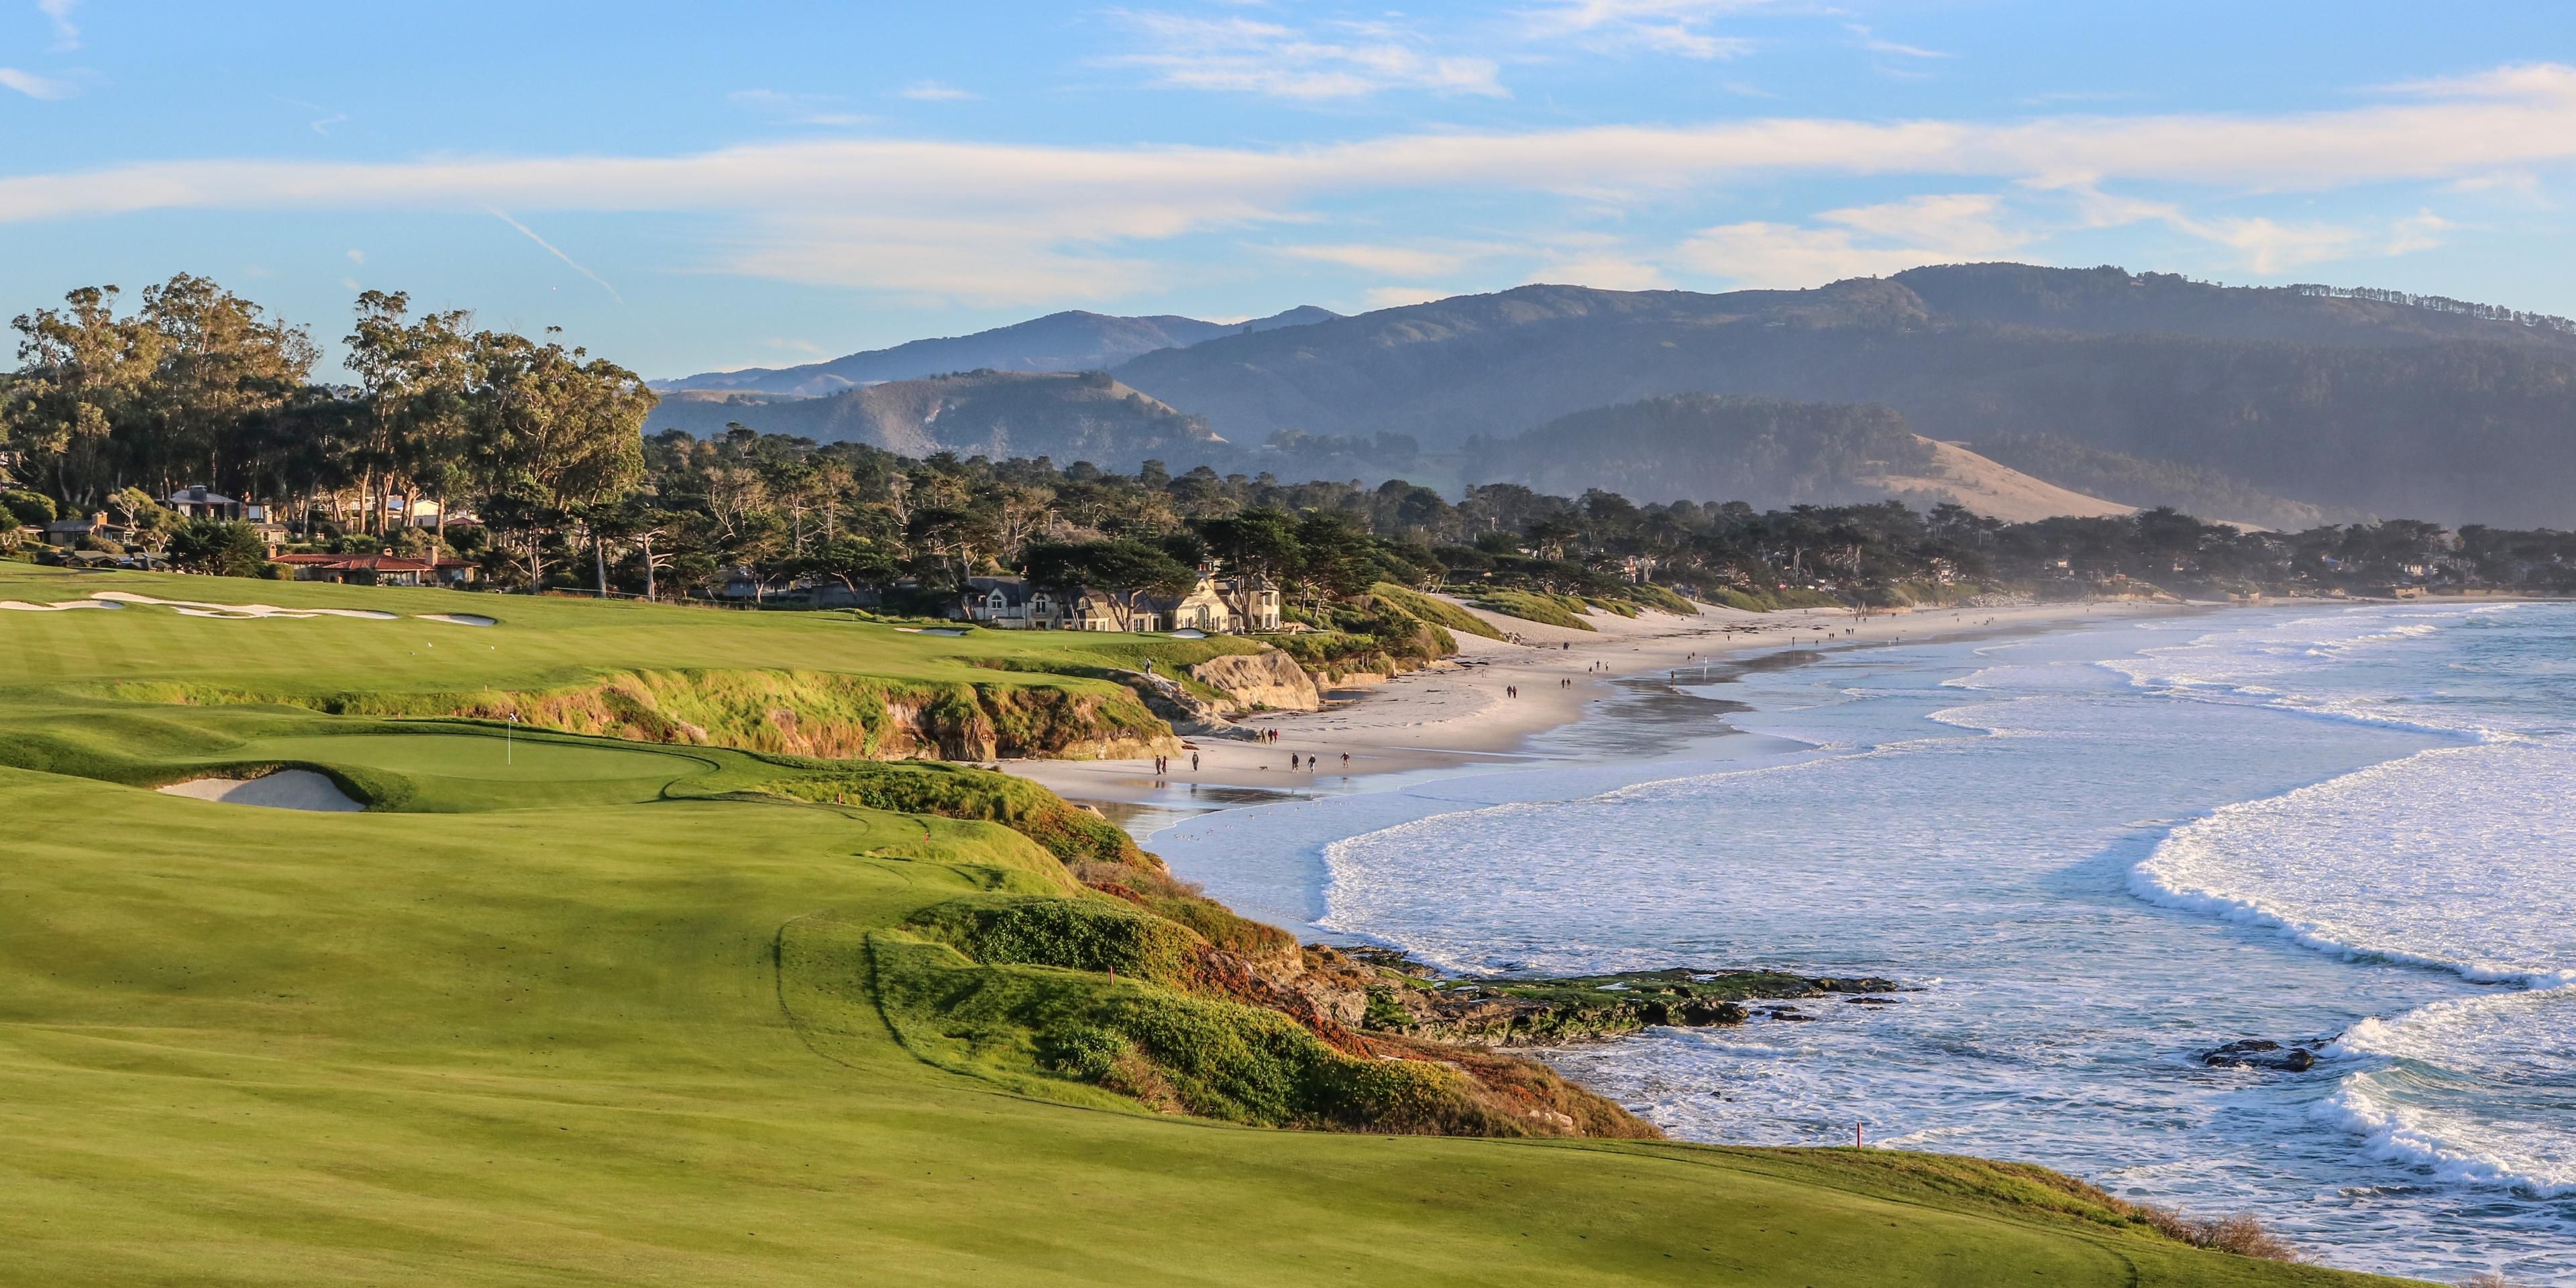 Courtesy of Pebble Beach Company. Our hotel is situated just 10 minutes away!